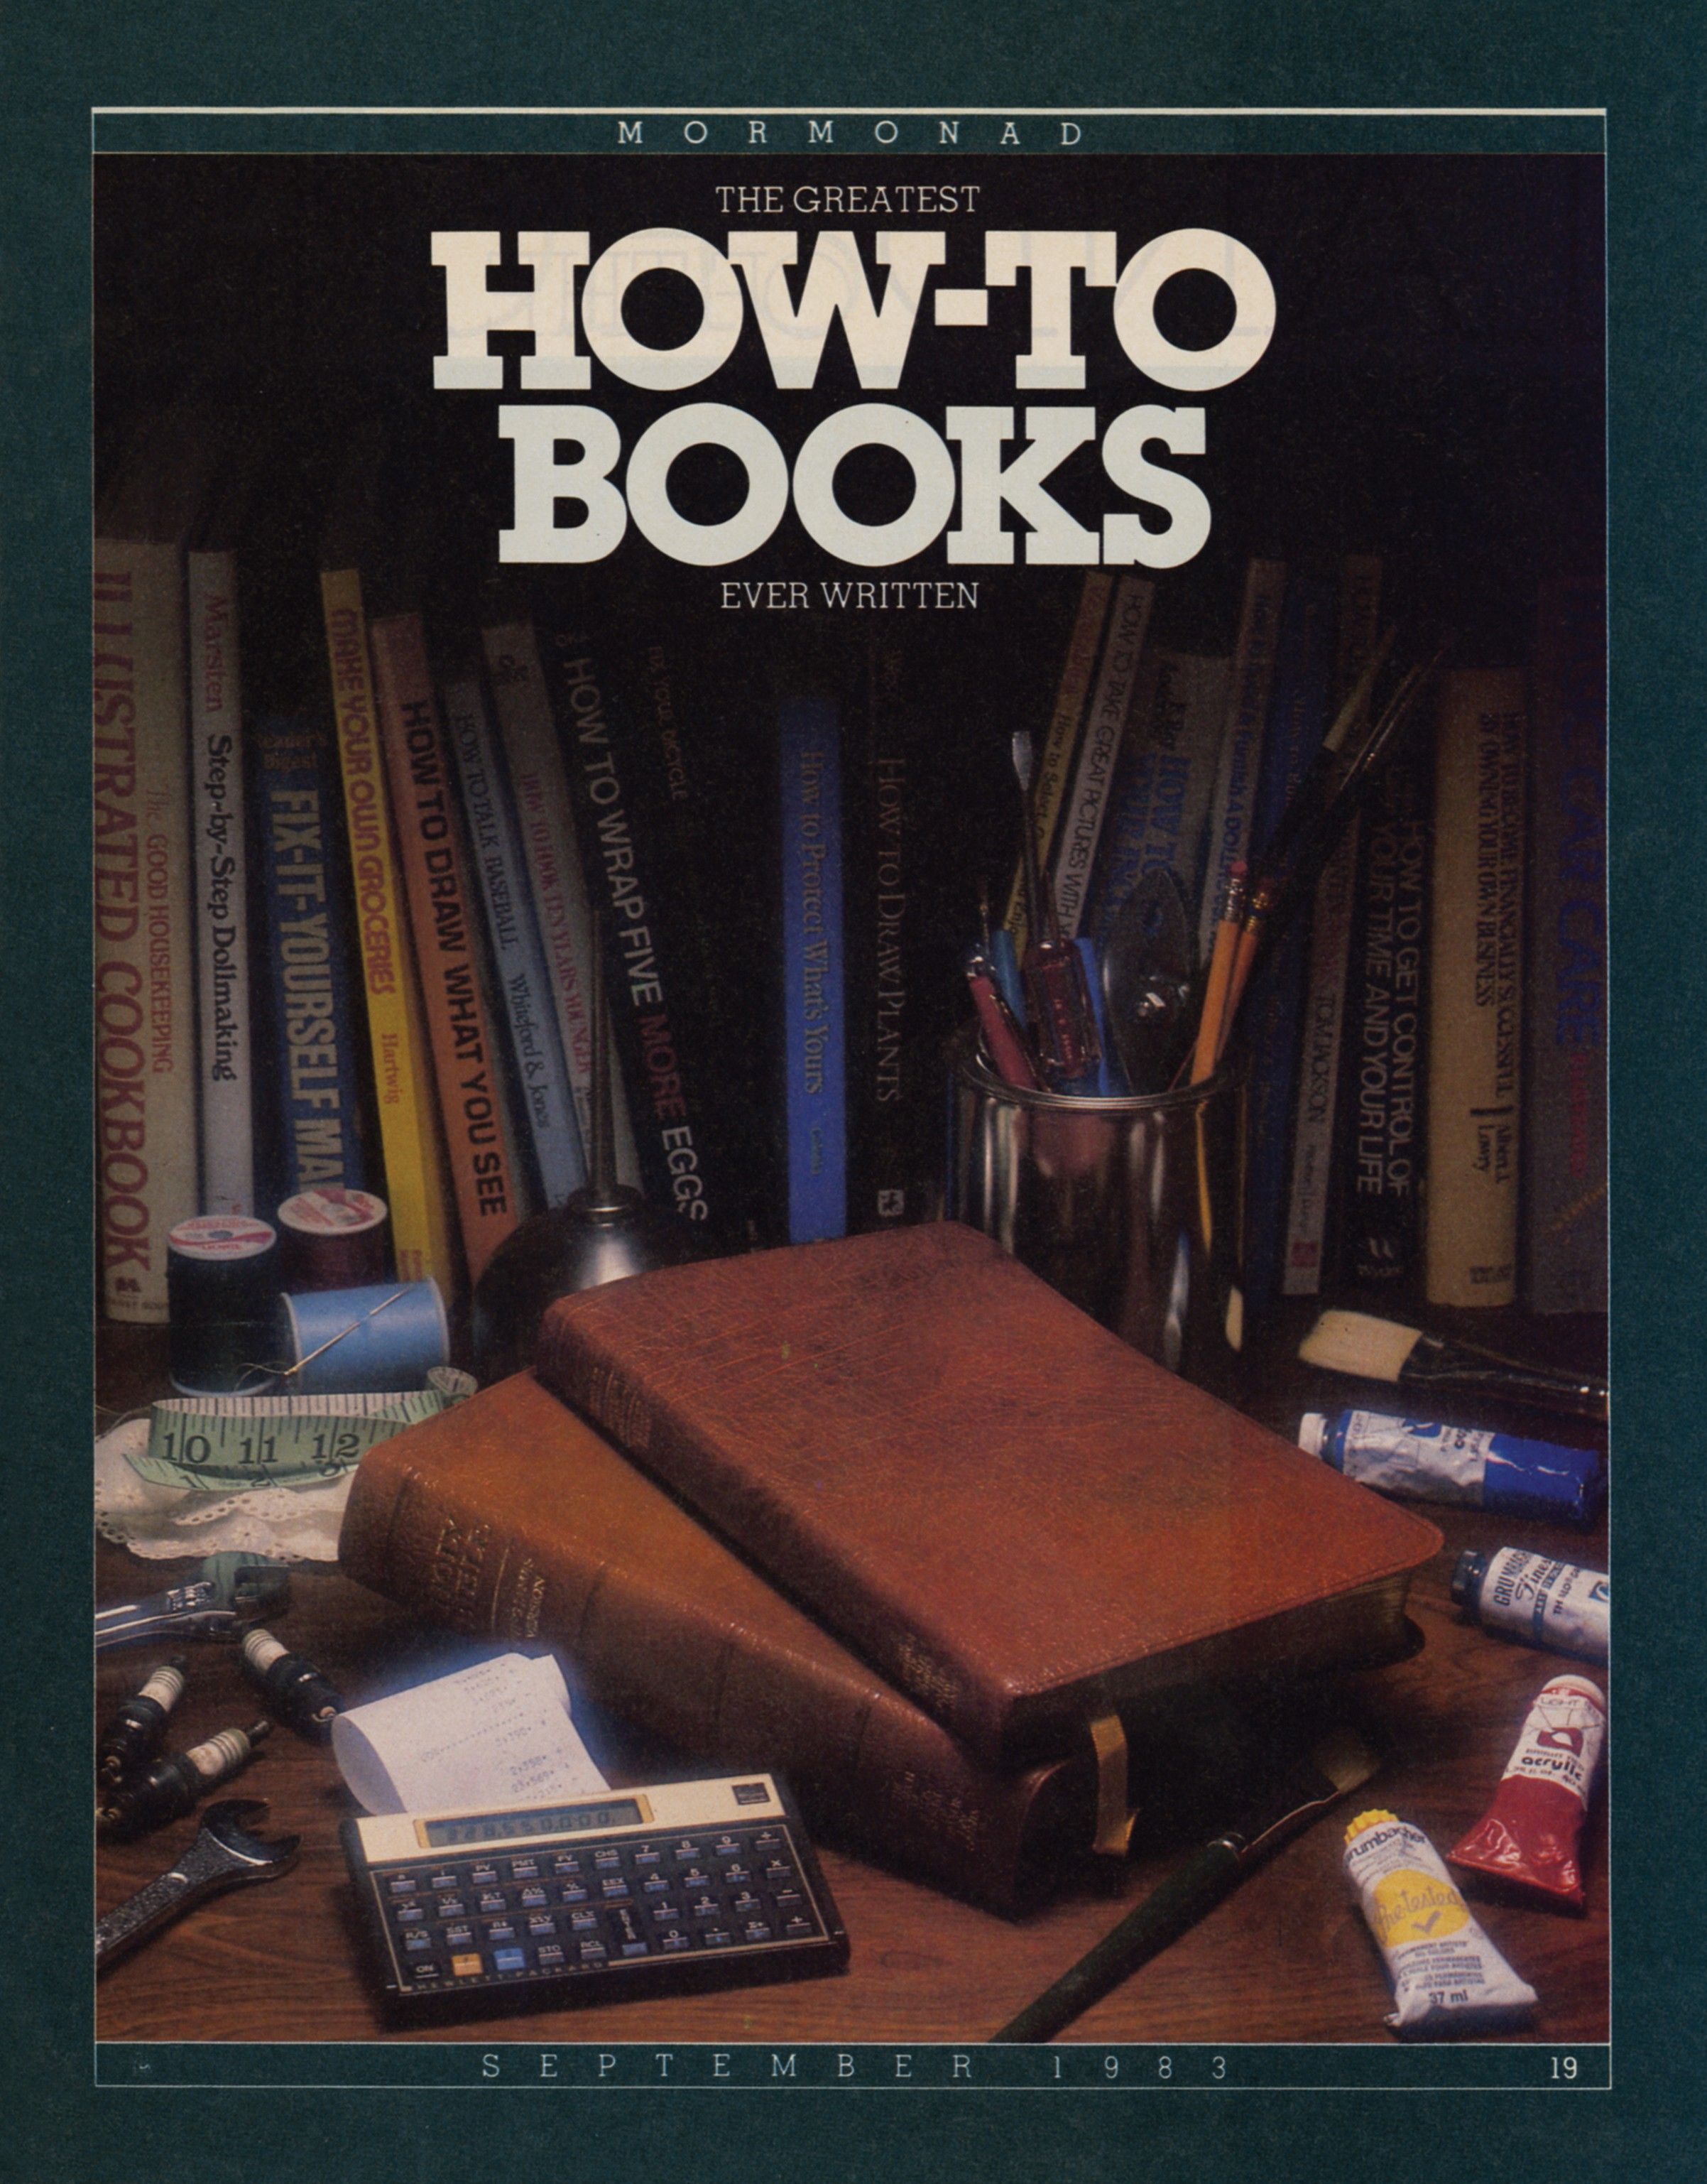 The Greatest How-to Books Ever Written. Sept. 1983 © undefined ipCode 1.